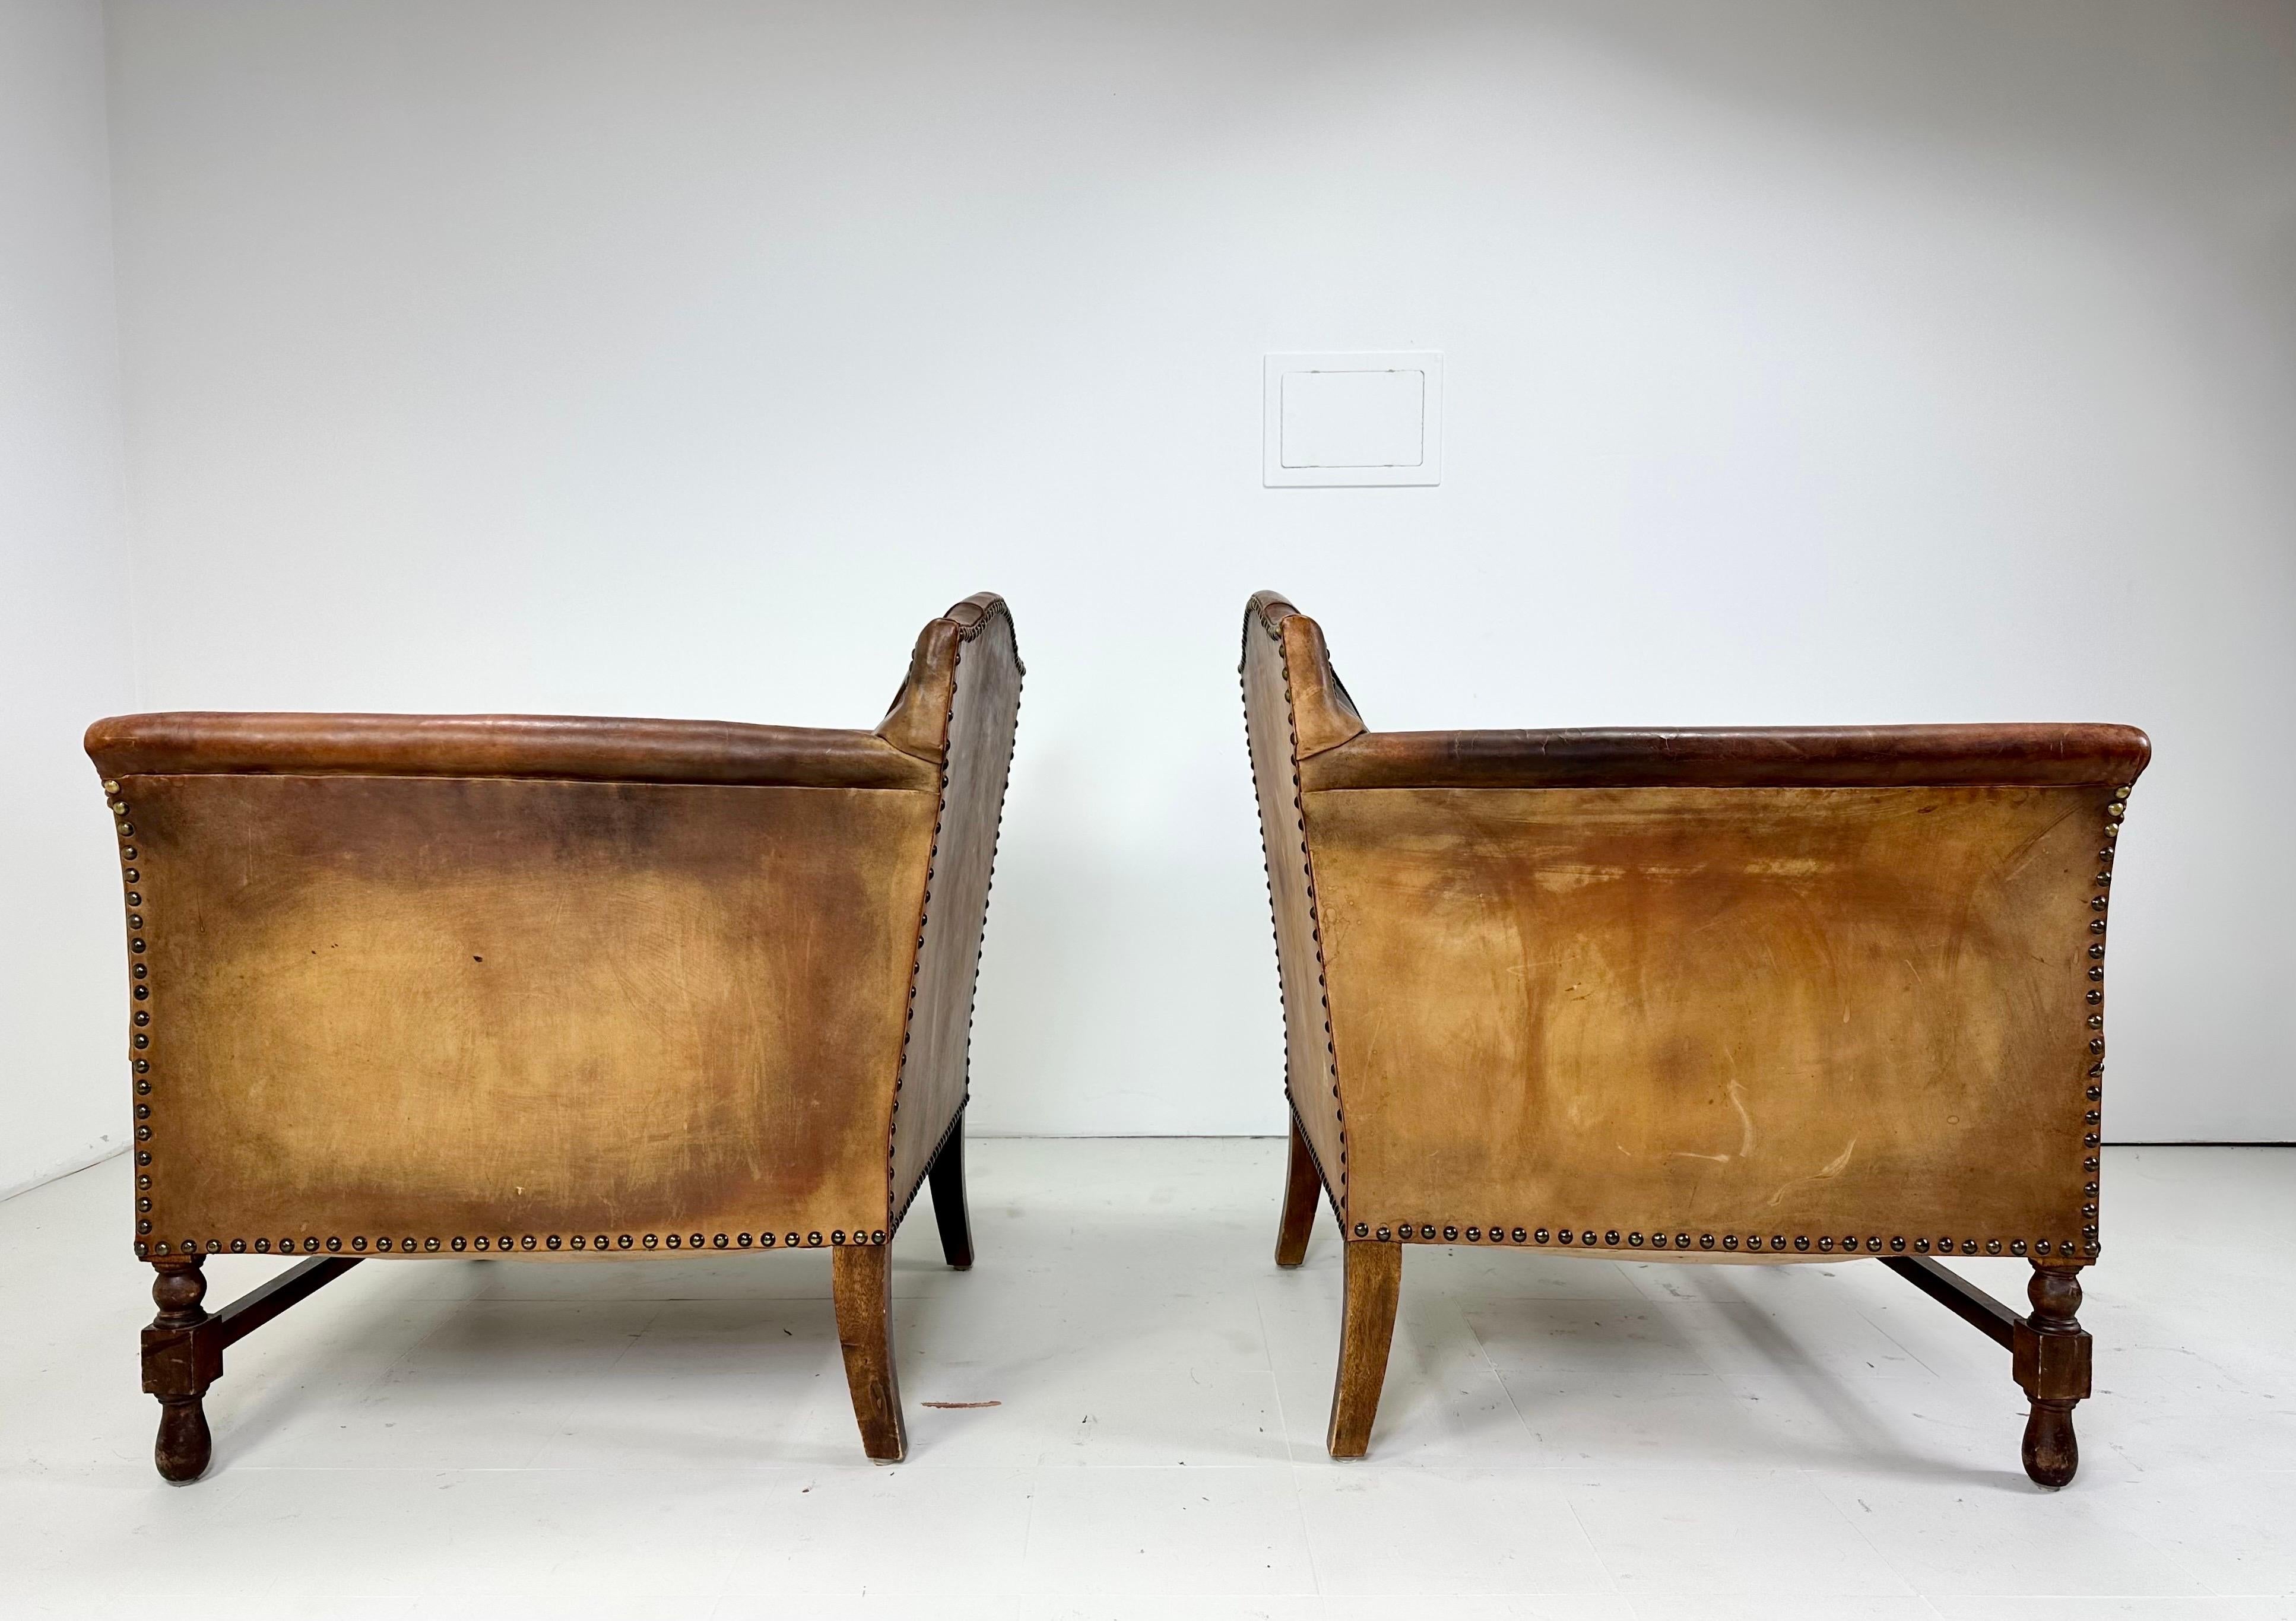 Early 20th Century European Leather Lounge Chairs. Decorative nailhead design. Turned wood legs. Later upholstery to seat cushion. Possible 1920's. Nicely worn leather patina.

Delivery to NYC Available for $425